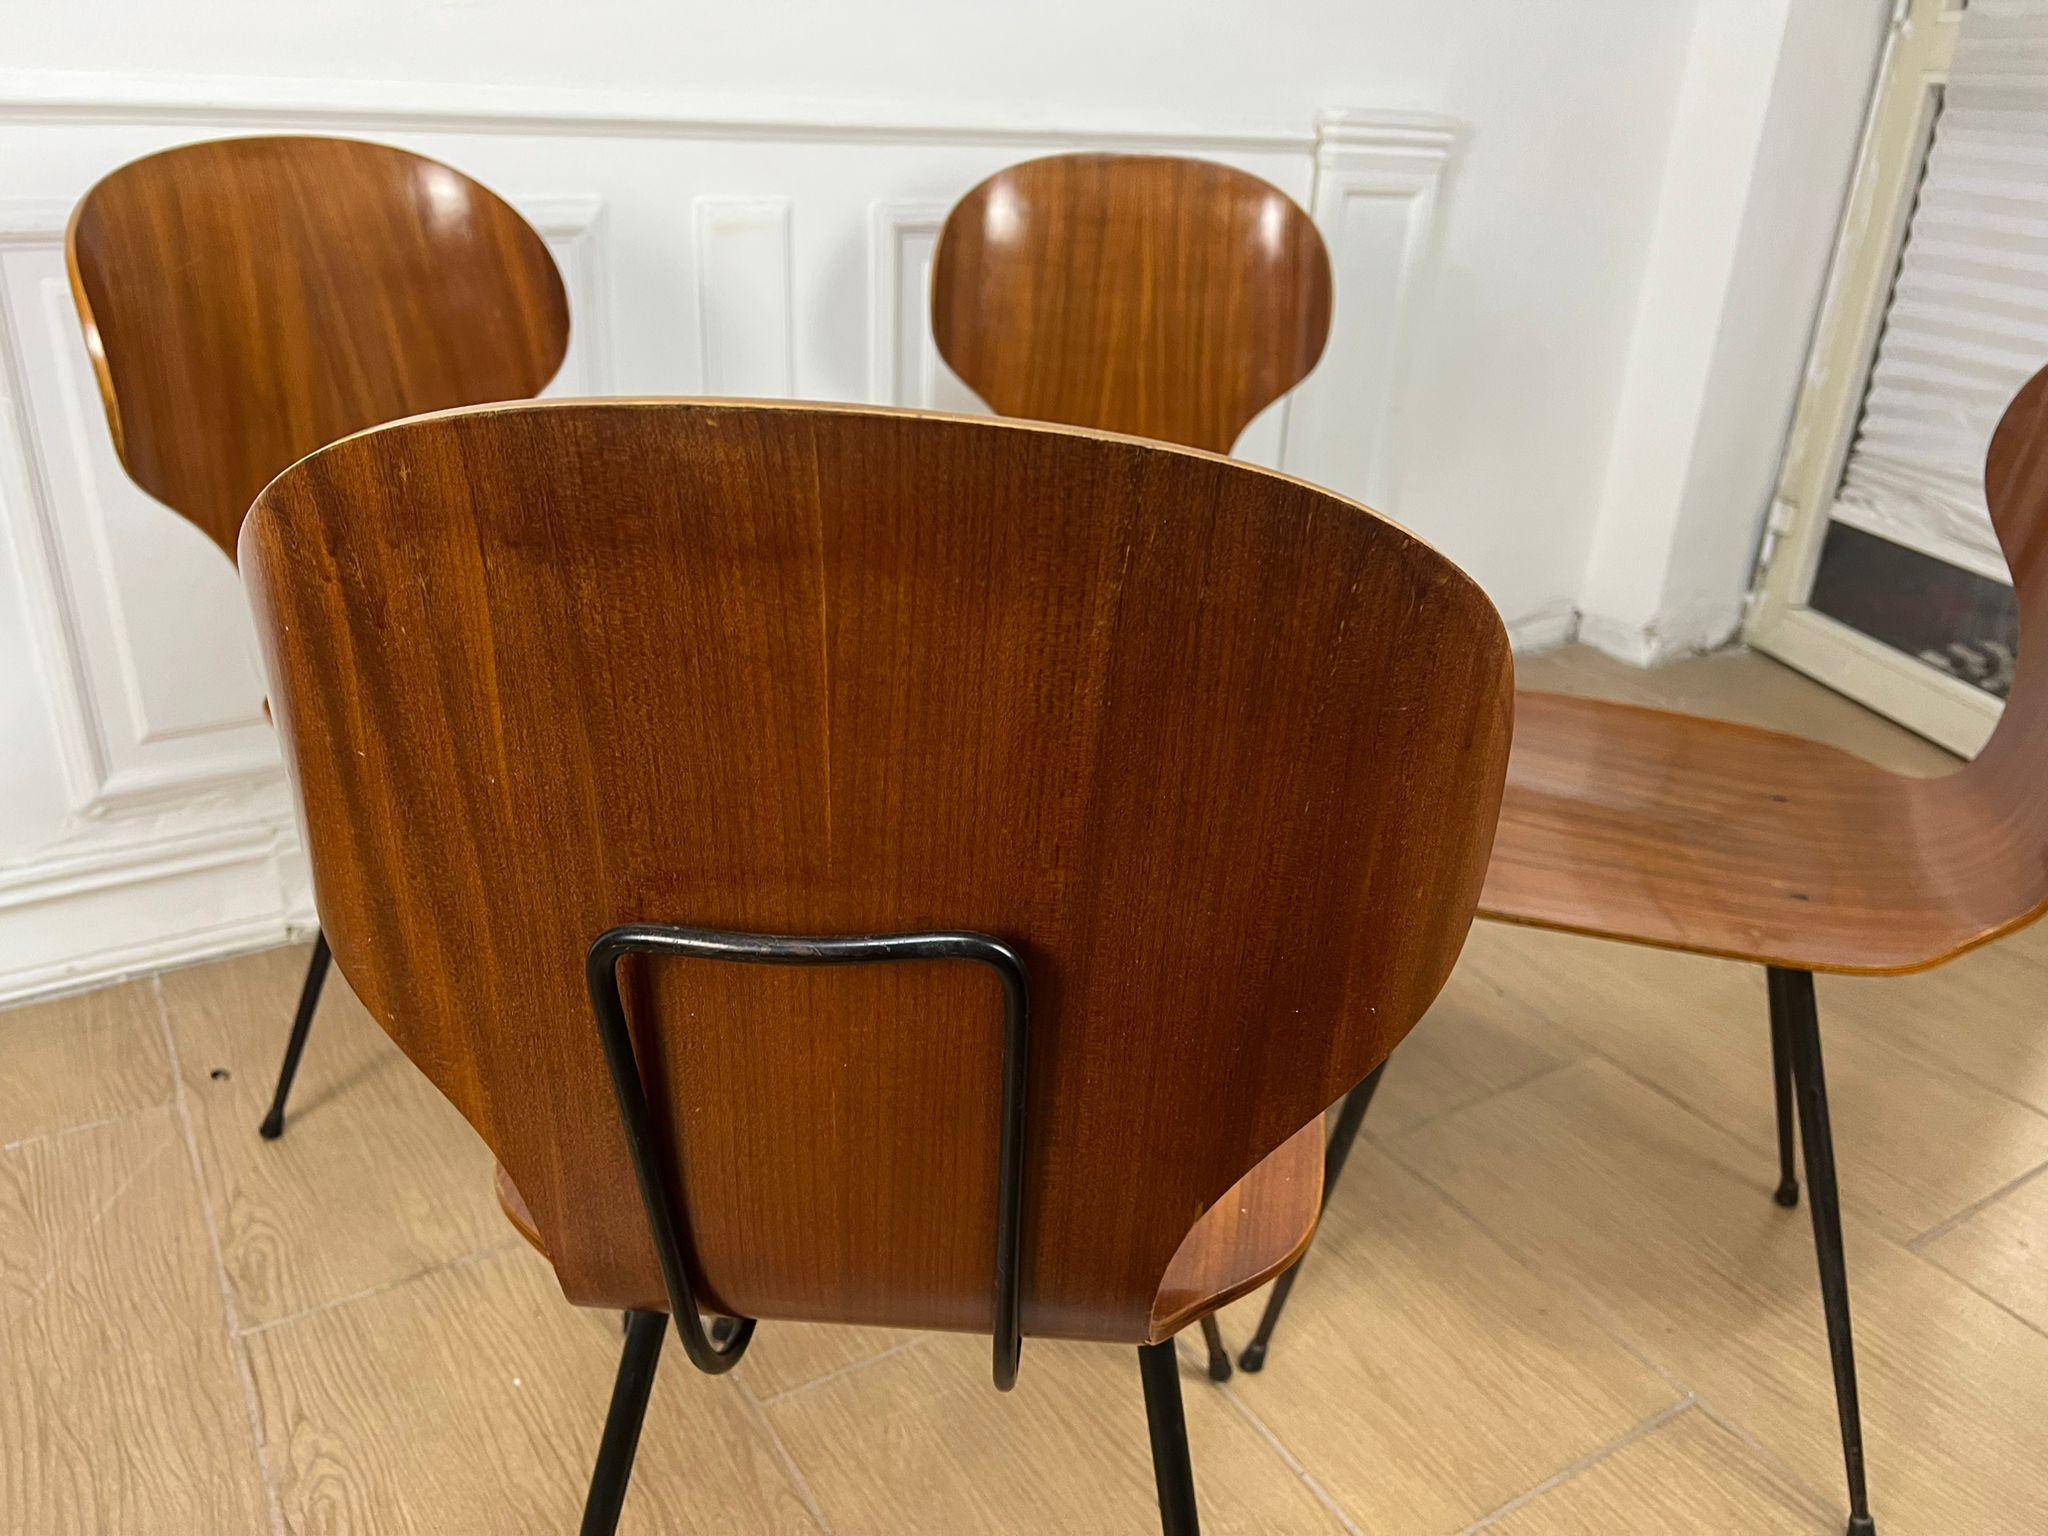 Iron Set of Four Chairs by Carlo Ratti